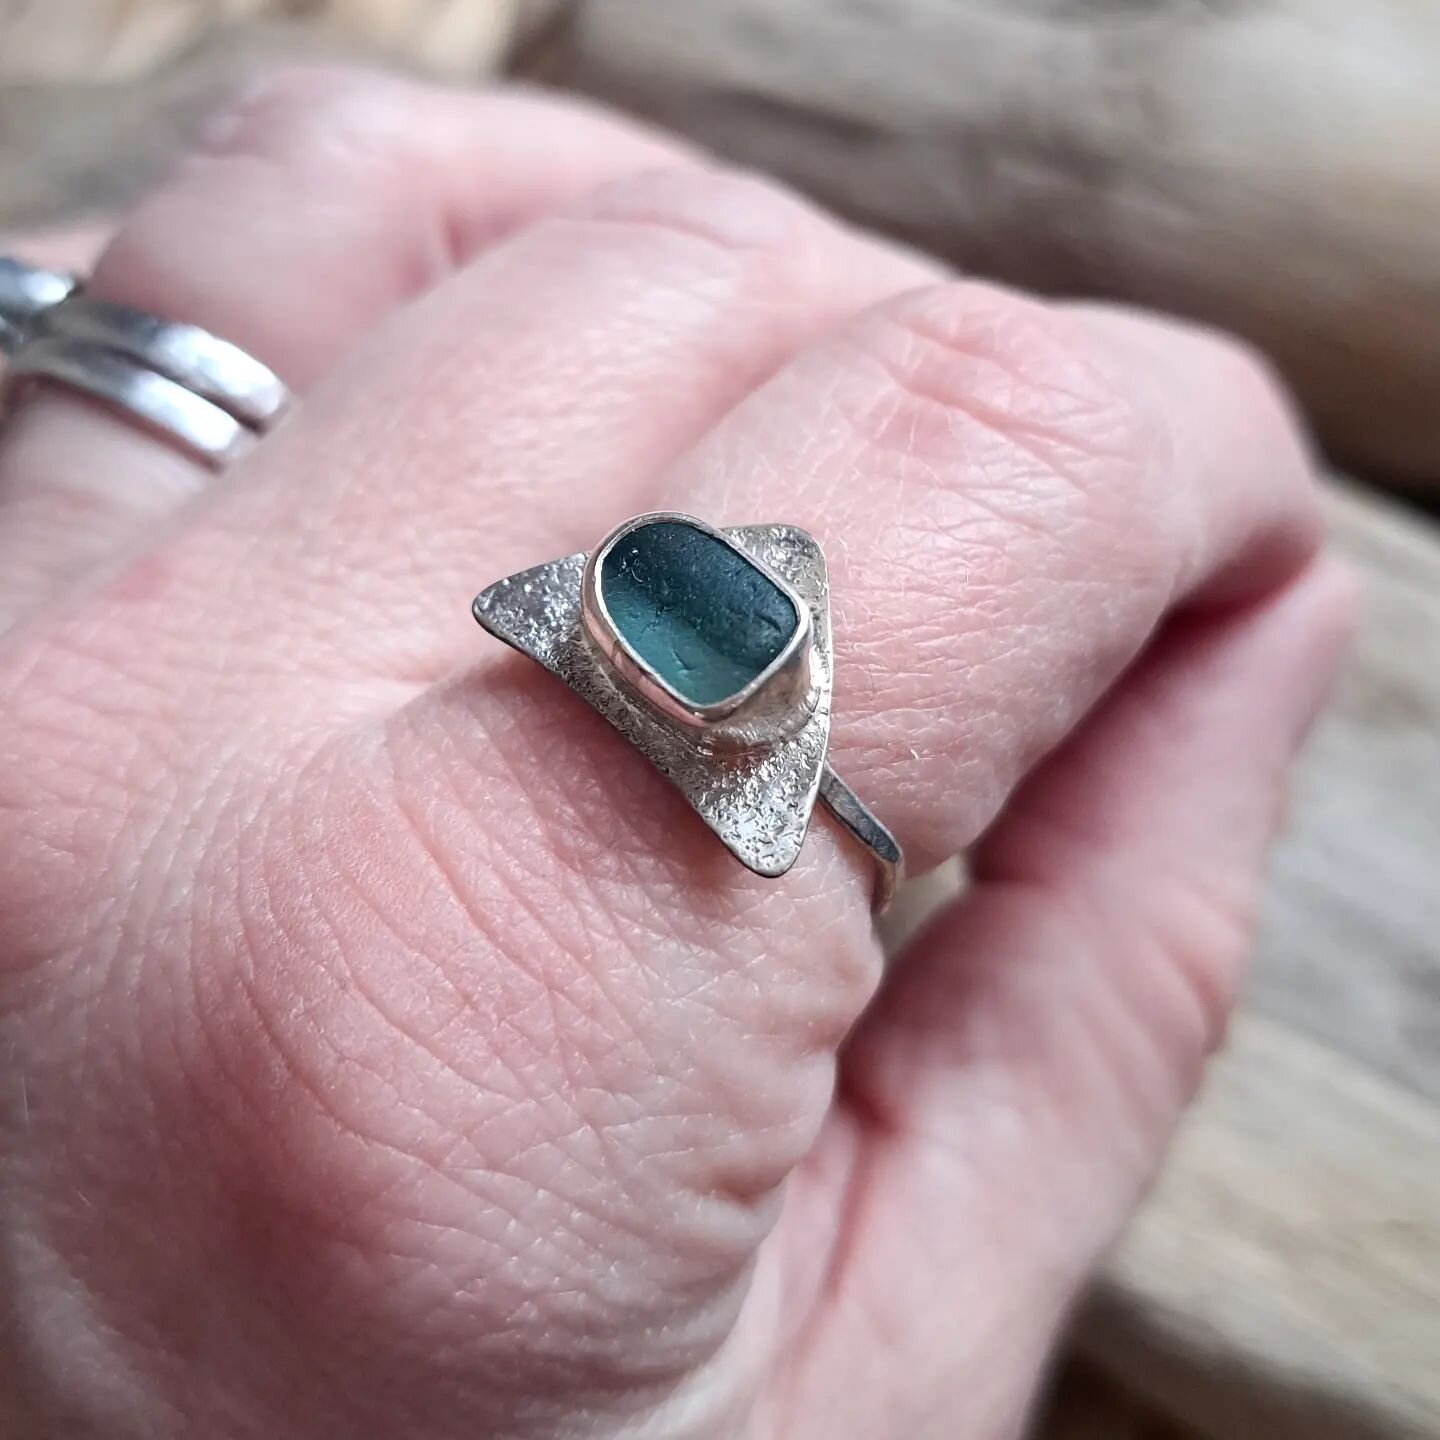 Another multi sea glass to show you today, this one has two shades of teal and a triangular setting &hearts;️

https://www.ilovedollyjewellery.co.uk/rings/